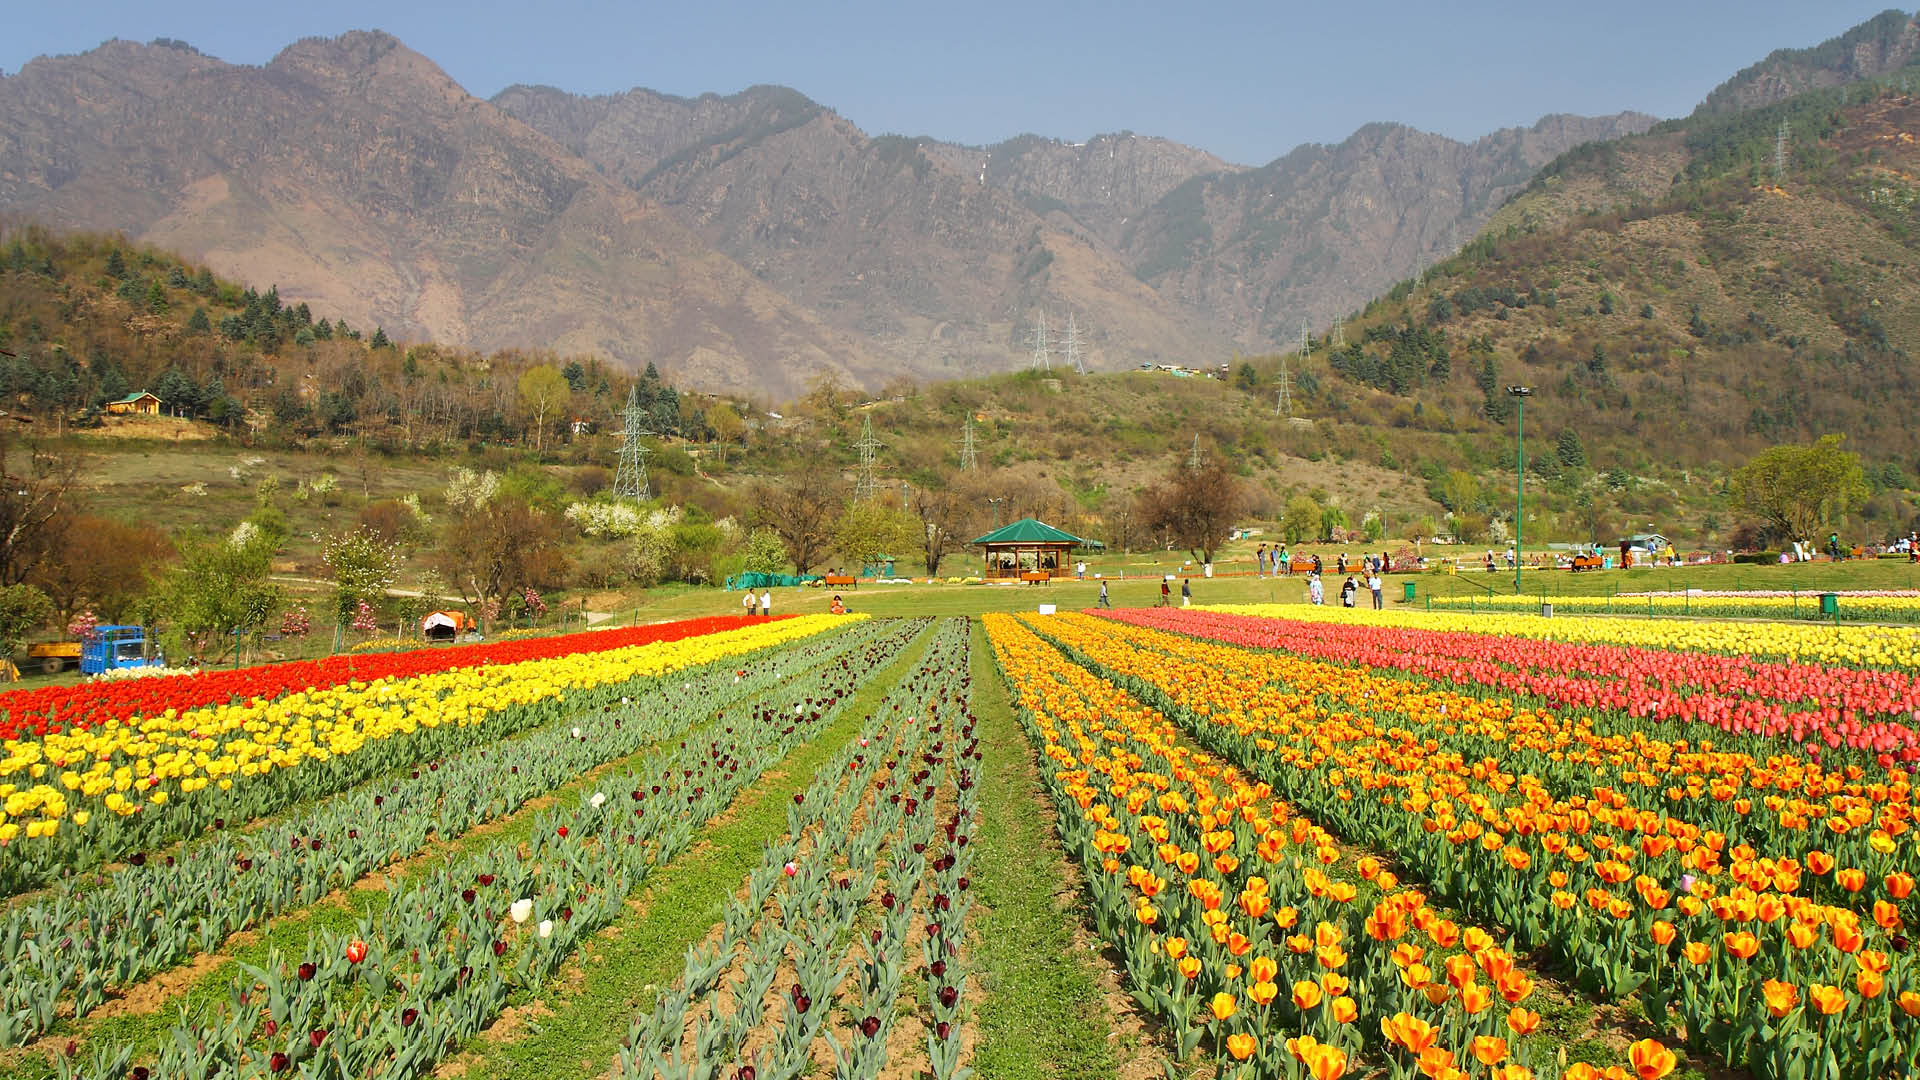 Tulip Festival In Kashmir Puts Up A Stunning Display Of Nature's Beaut